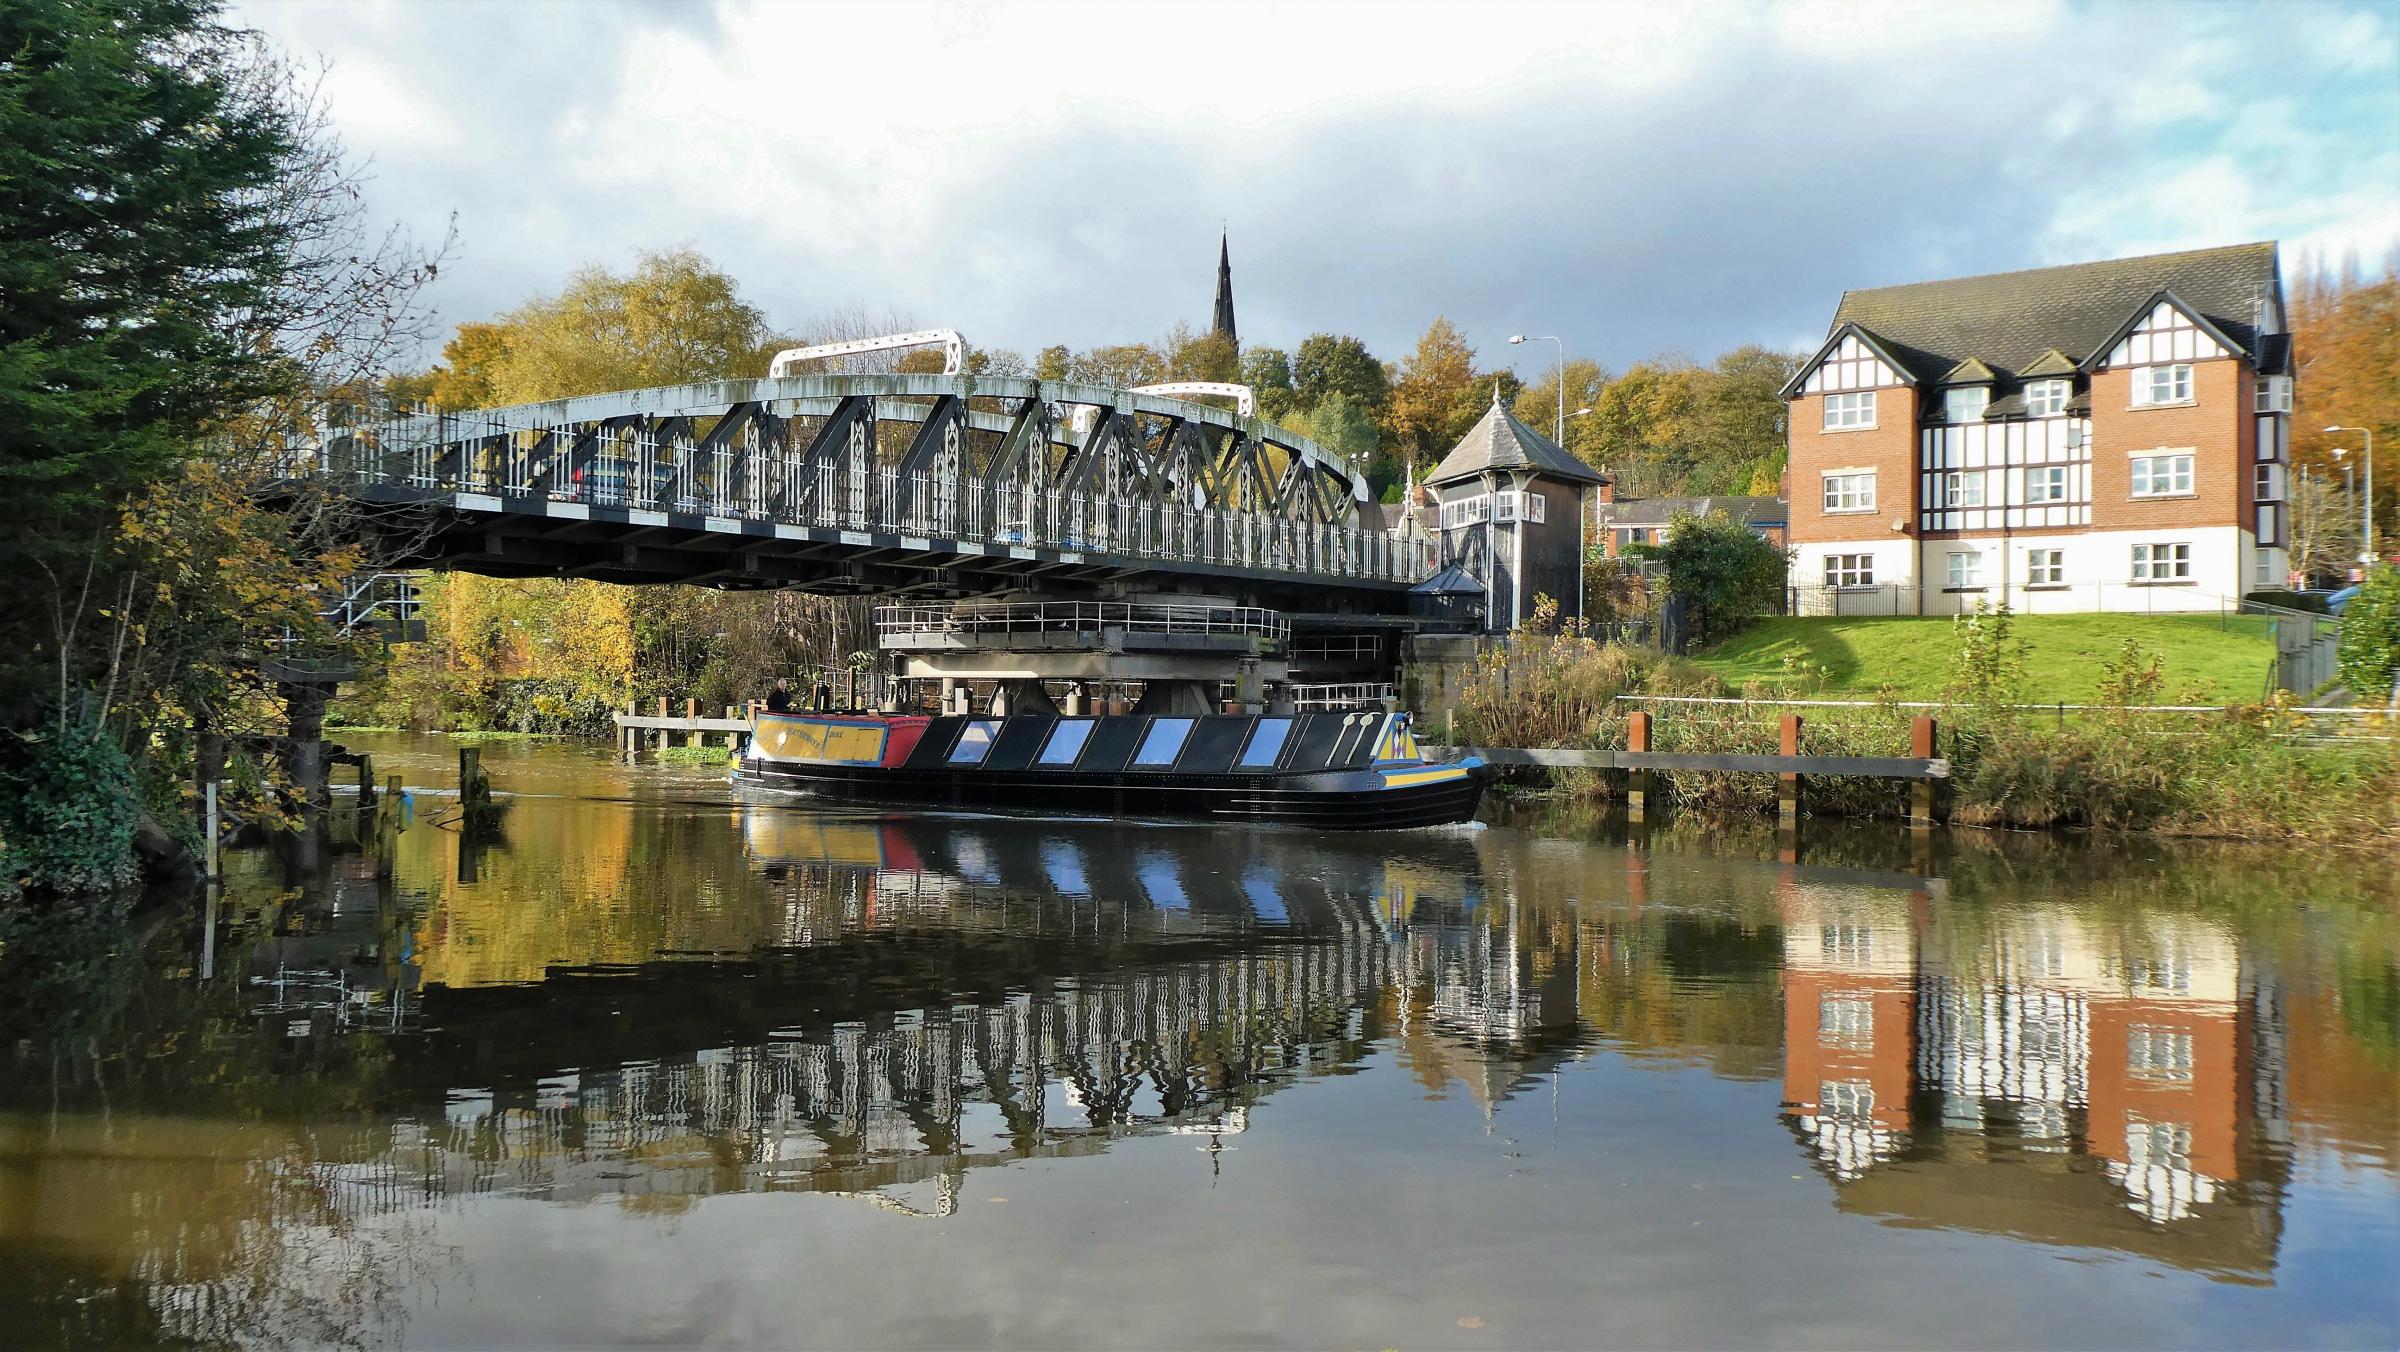 Reflections of Hayhurst Bridge on the River Weaver at Northwich by Lynne Bentley